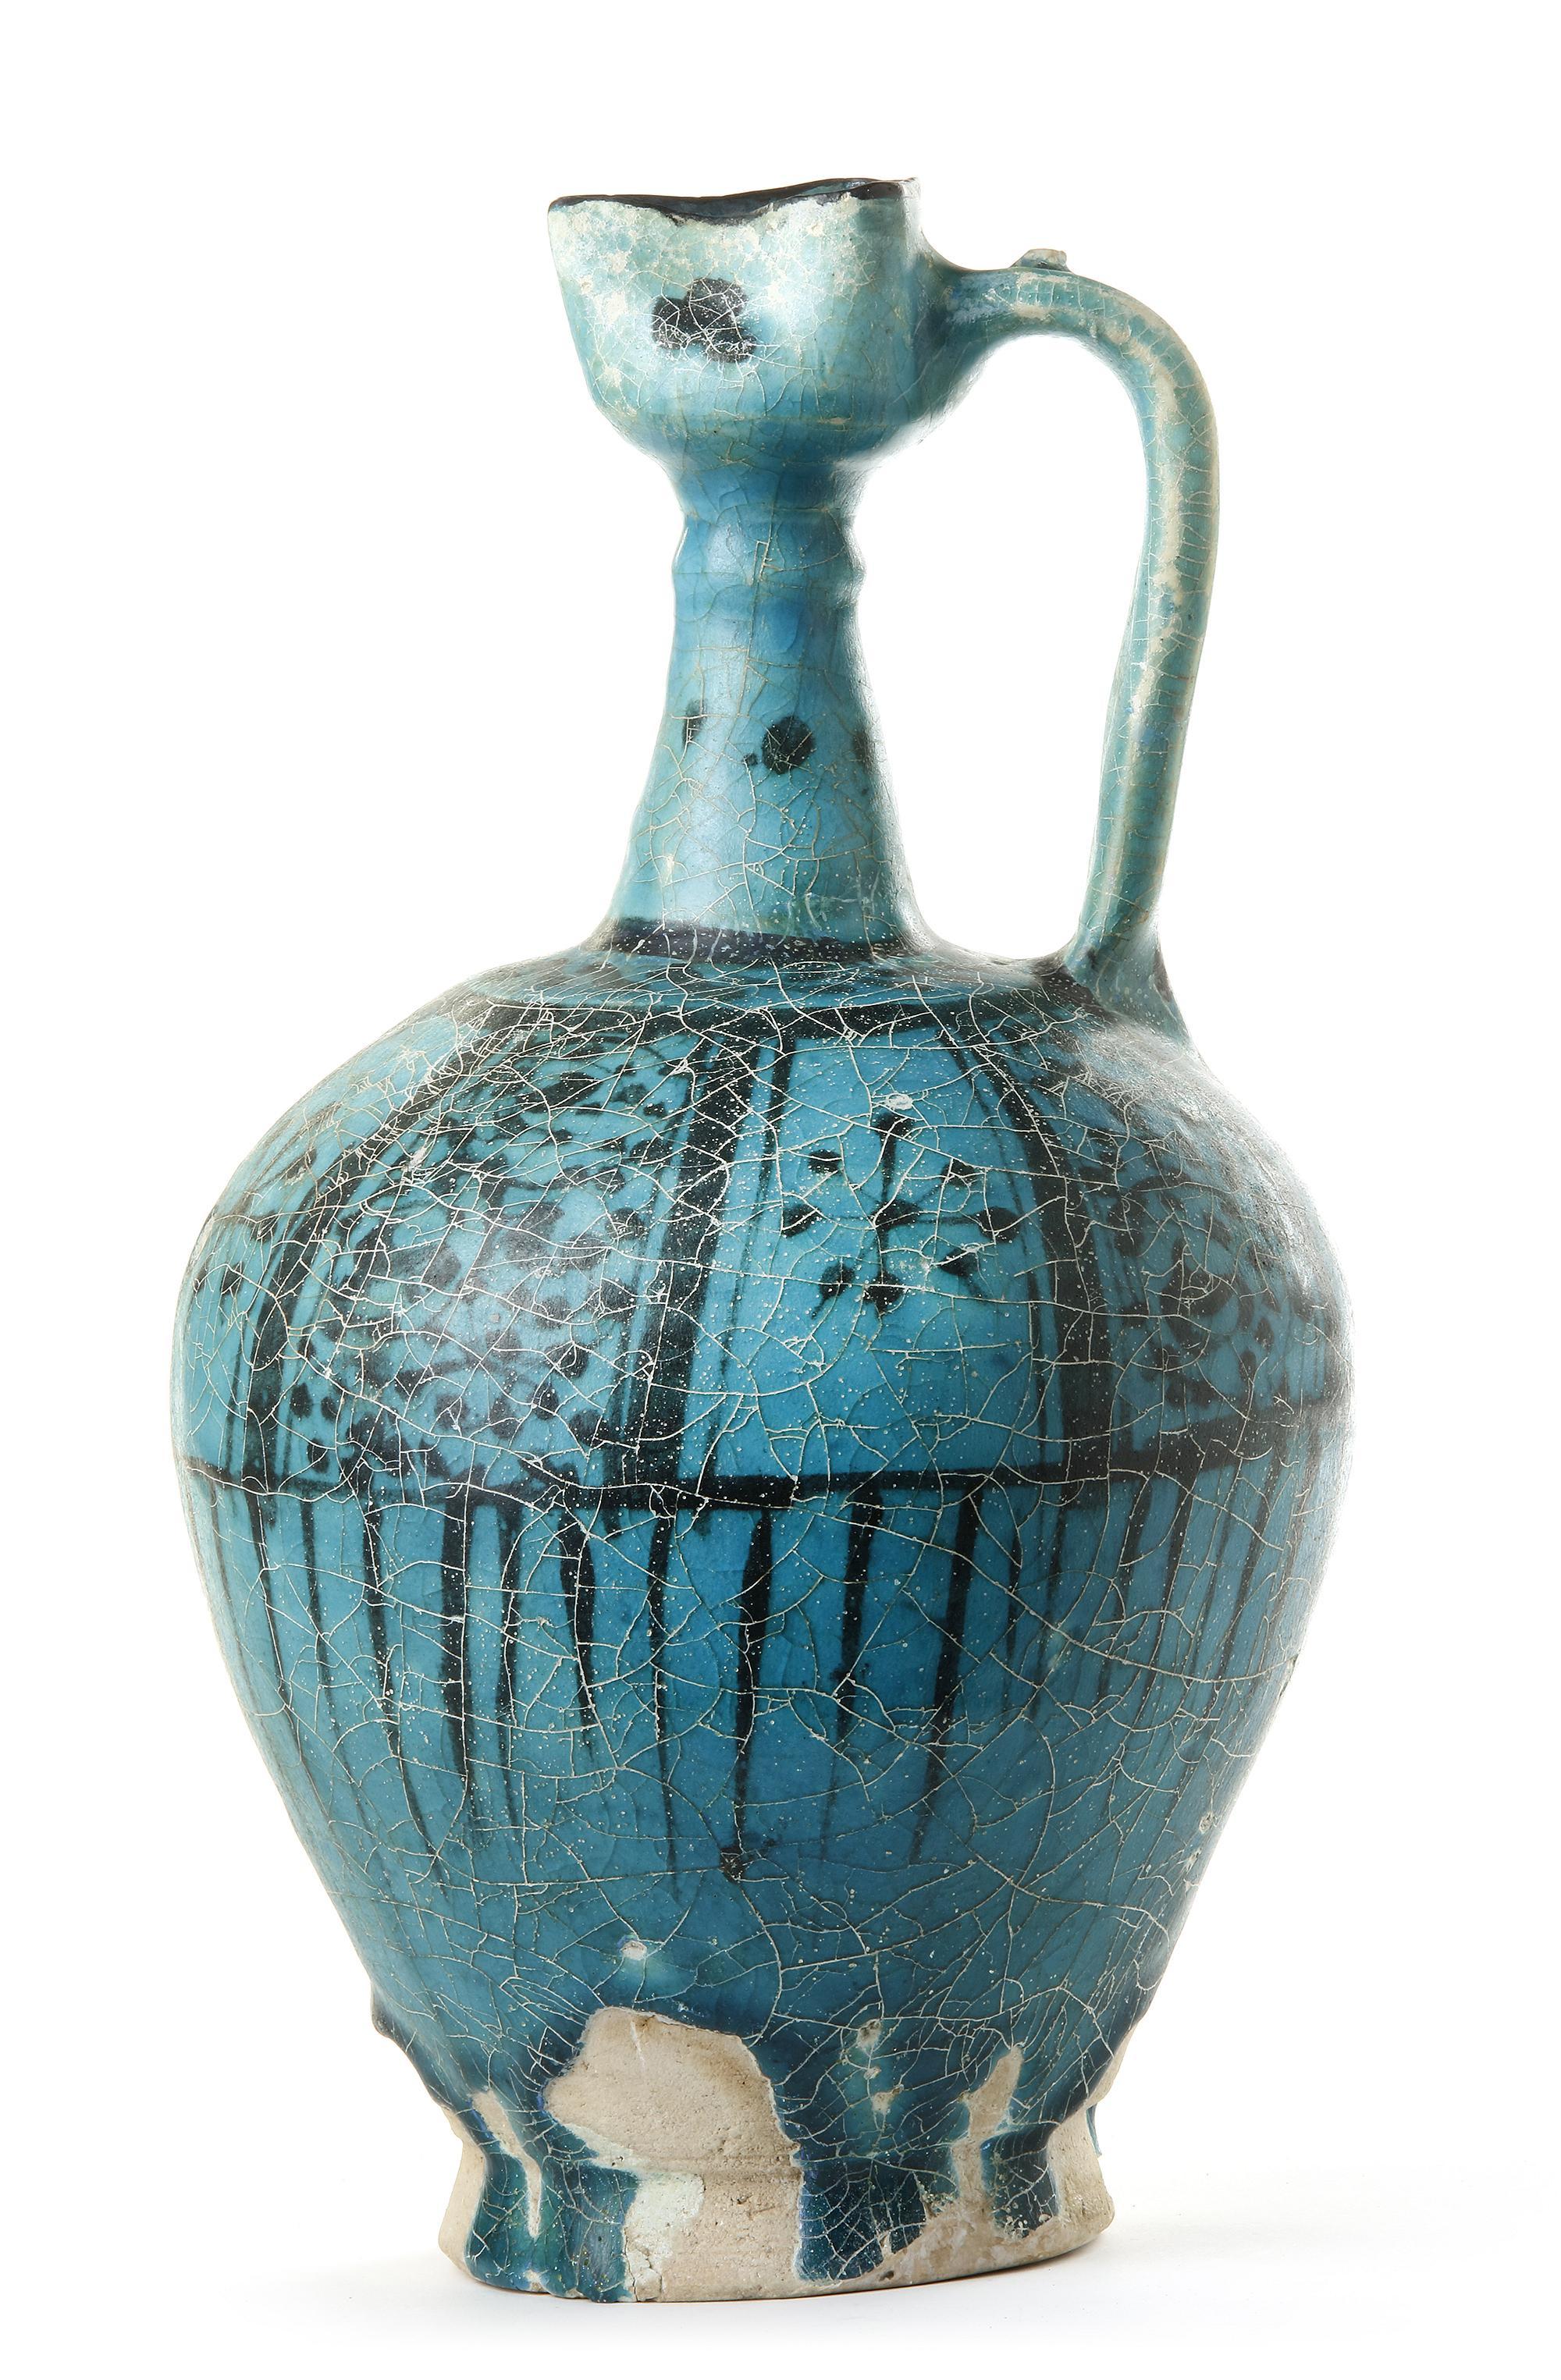 A LARGE RAQQA UNDERGLAZE PAINTED POTTERY EWER, SYRIA, 12TH-13TH CENTURY - Image 2 of 20